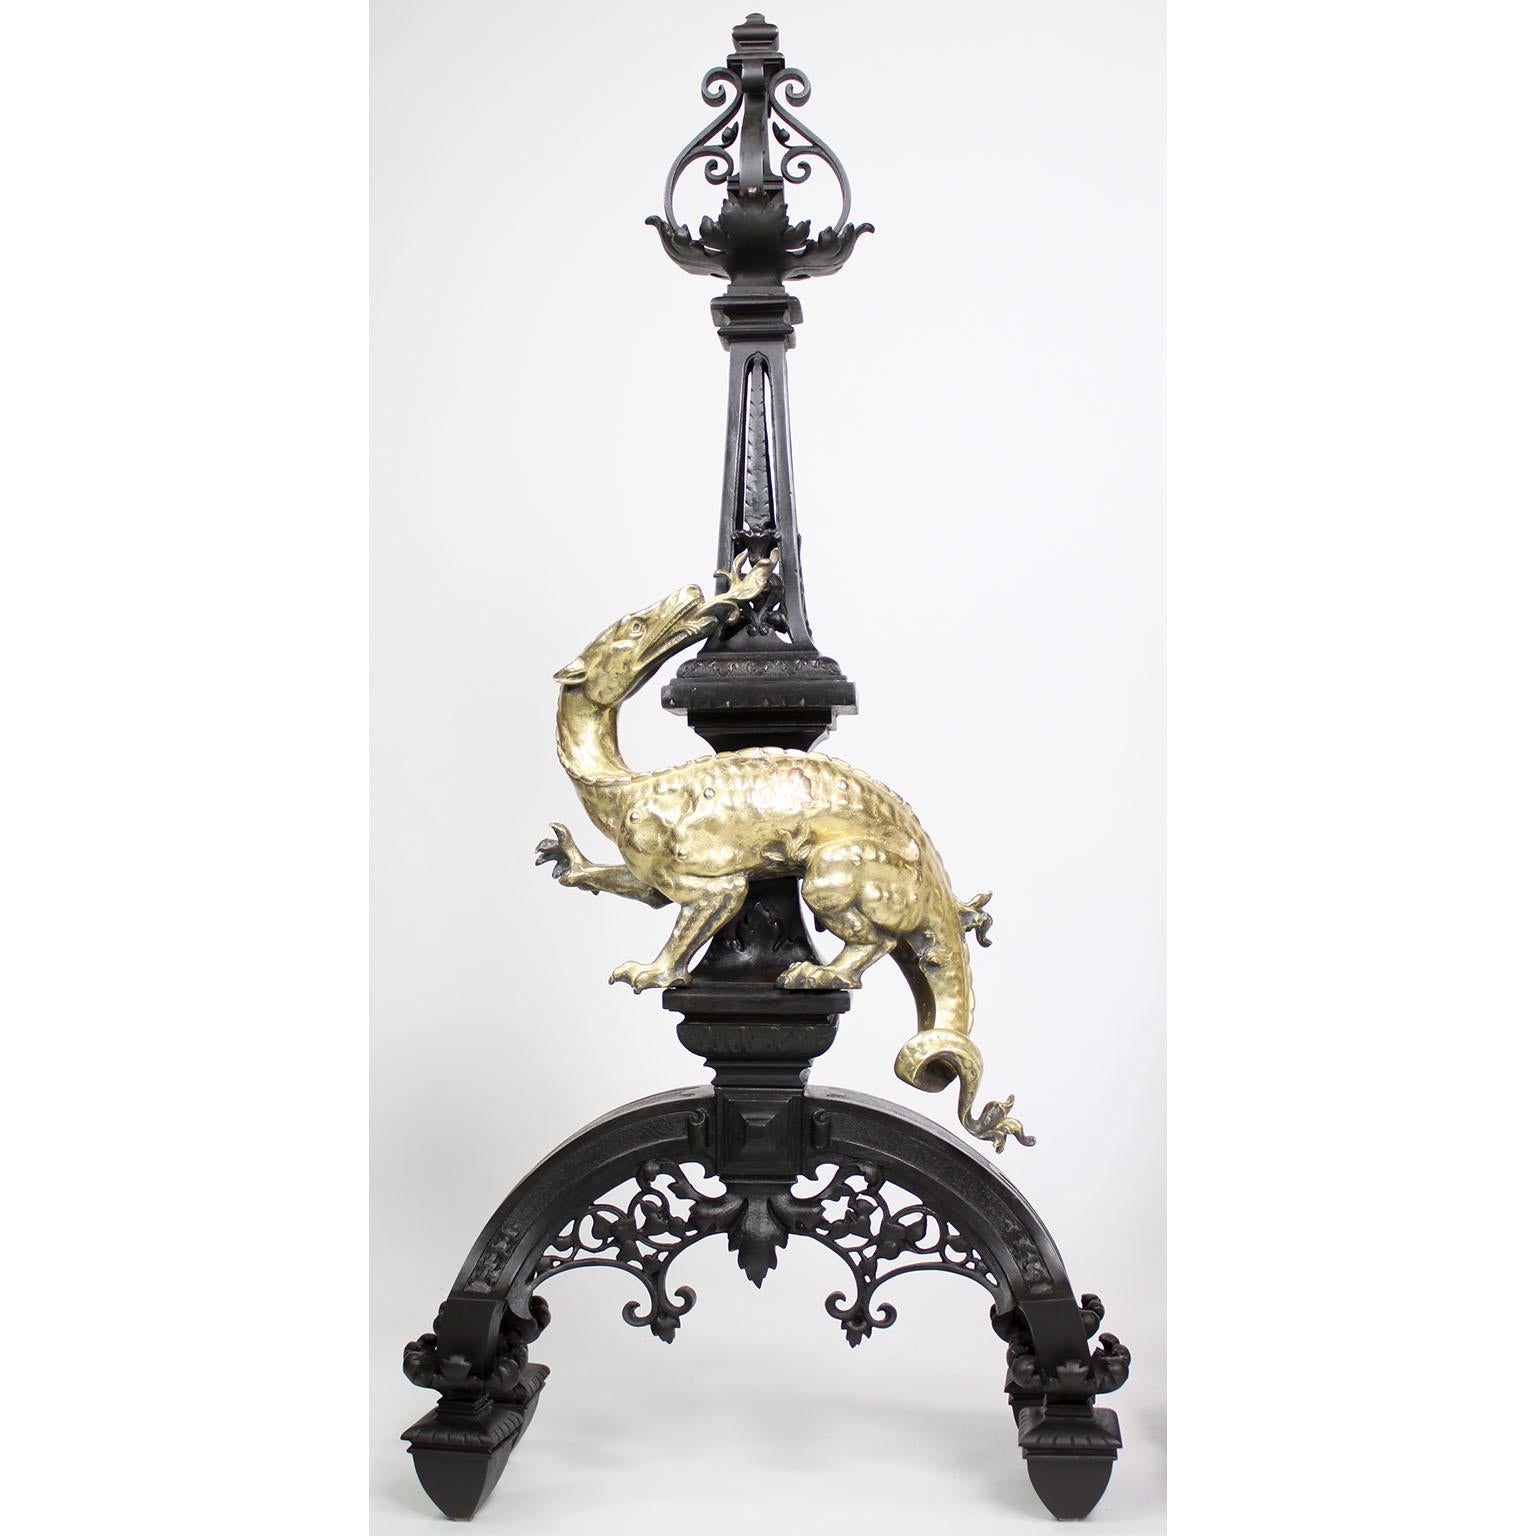 Belgian Group of 6 Franco/Dutch 19th/20th Century Japonisme Style Komodo Dragon Chenets For Sale